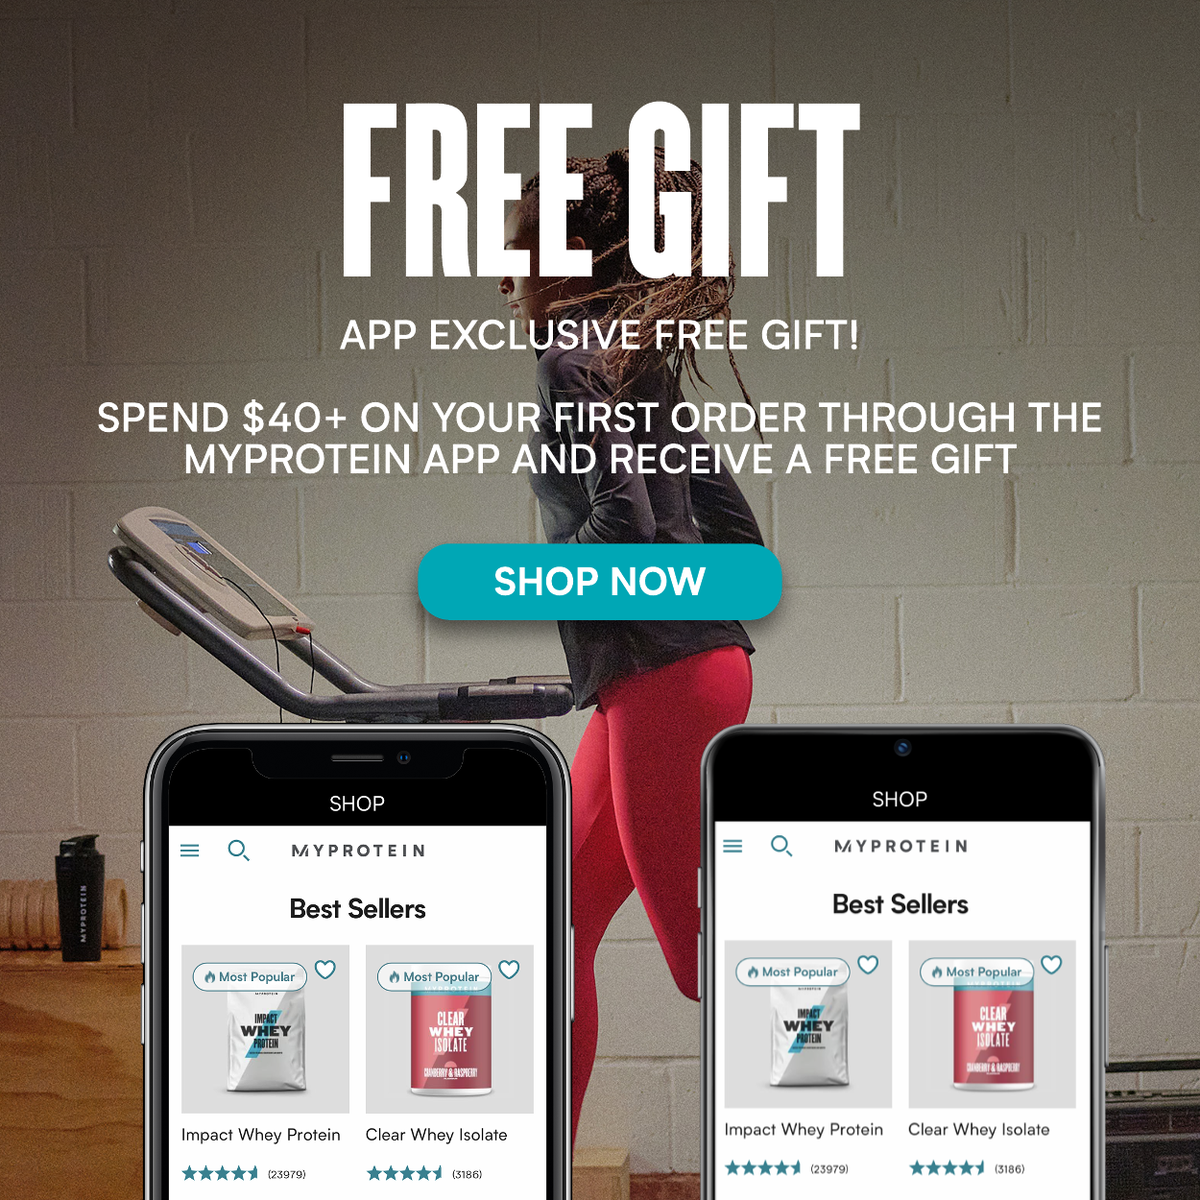 SPEND $40+ ON YOUR FIRST ORDER THROUGH THE MYPROTEIN APP AND RECEIVE A FREE GIFT